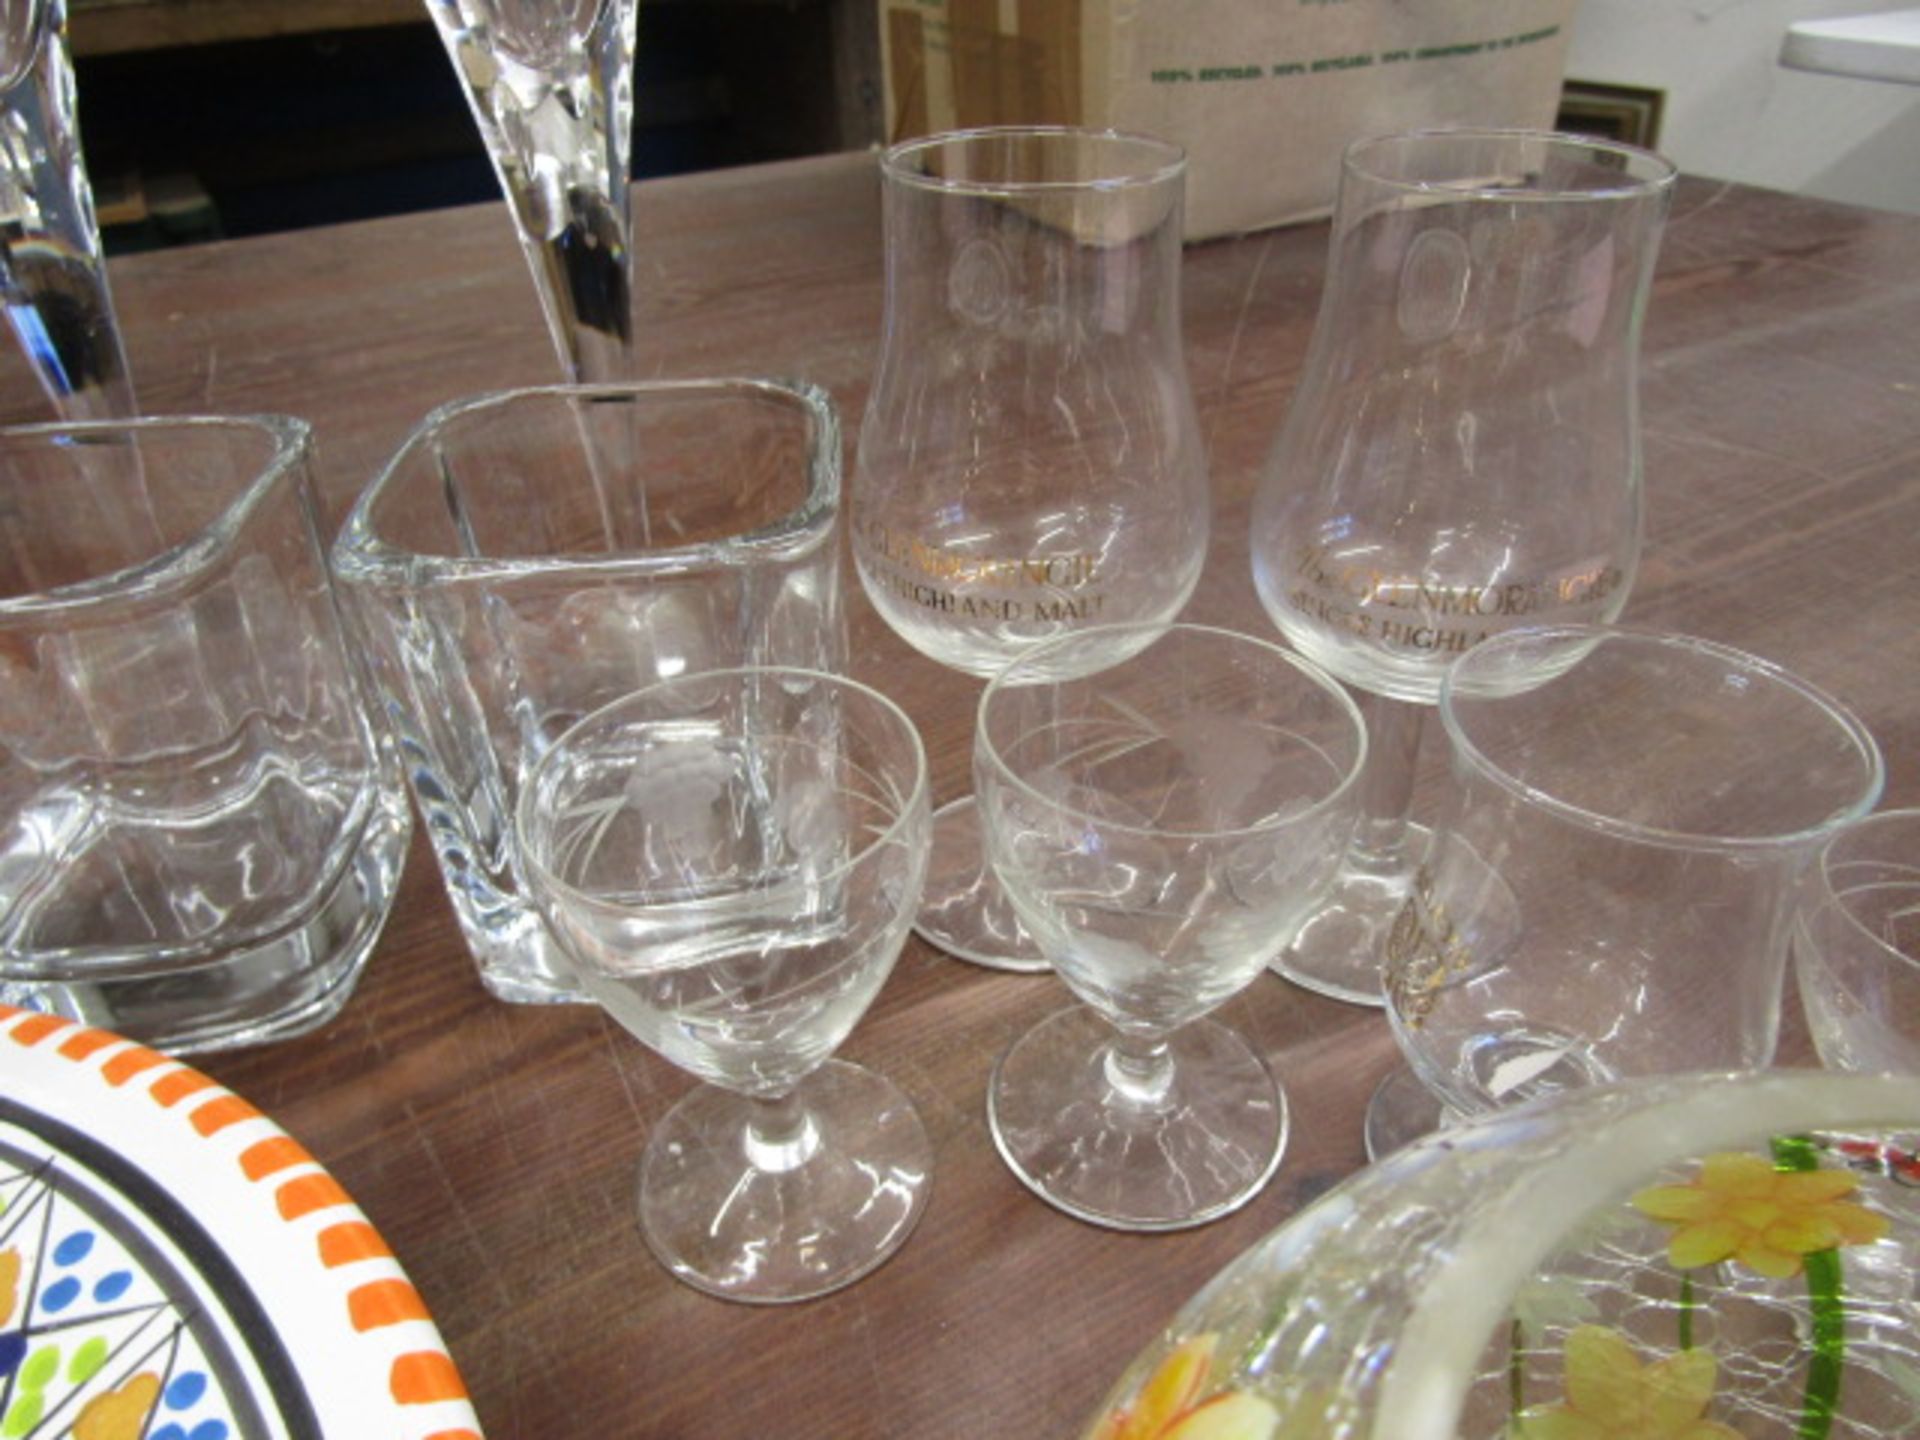 China and glass/ lead crystal glasses - Image 9 of 9